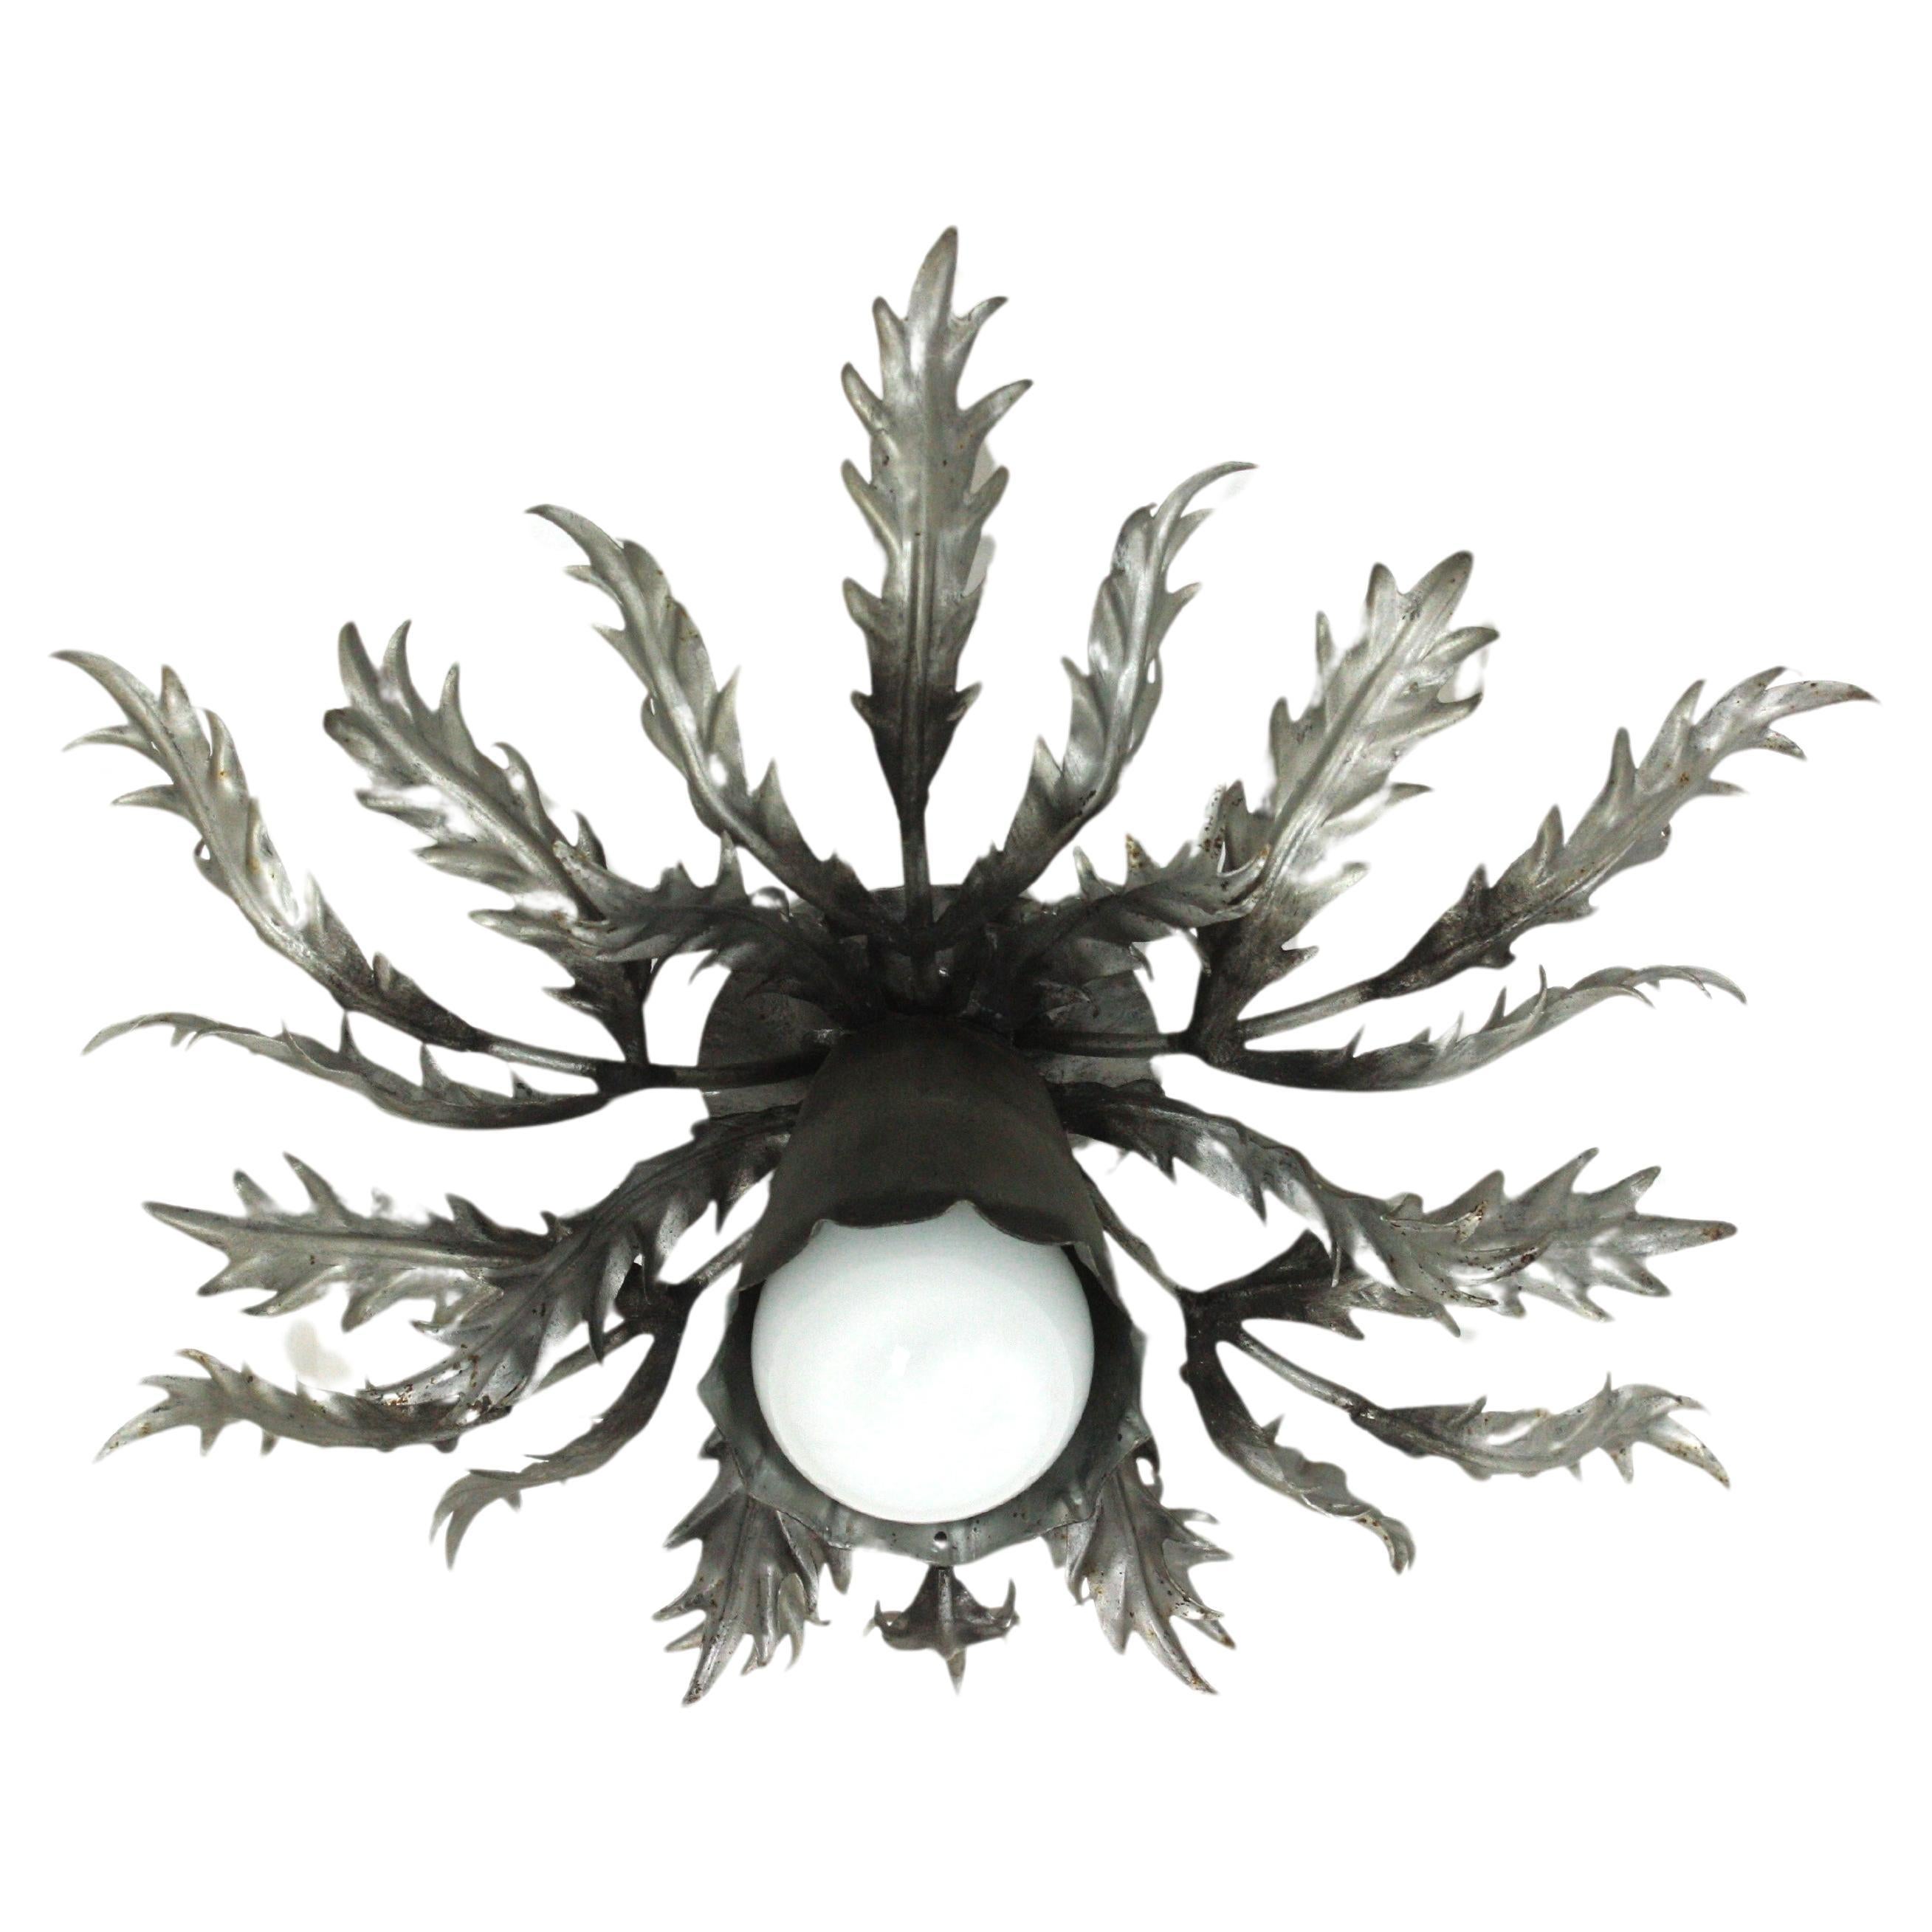 Spanish Foliage Sunburst Flush Mount Light Fixture in Silvered Iron
Stunning foliage sunburst ceiling light fixture, gilt iron, silver leaf, Spain, 1950s.
This eye-catching iron ceiling lamp features a double layered leafed frame of leaves